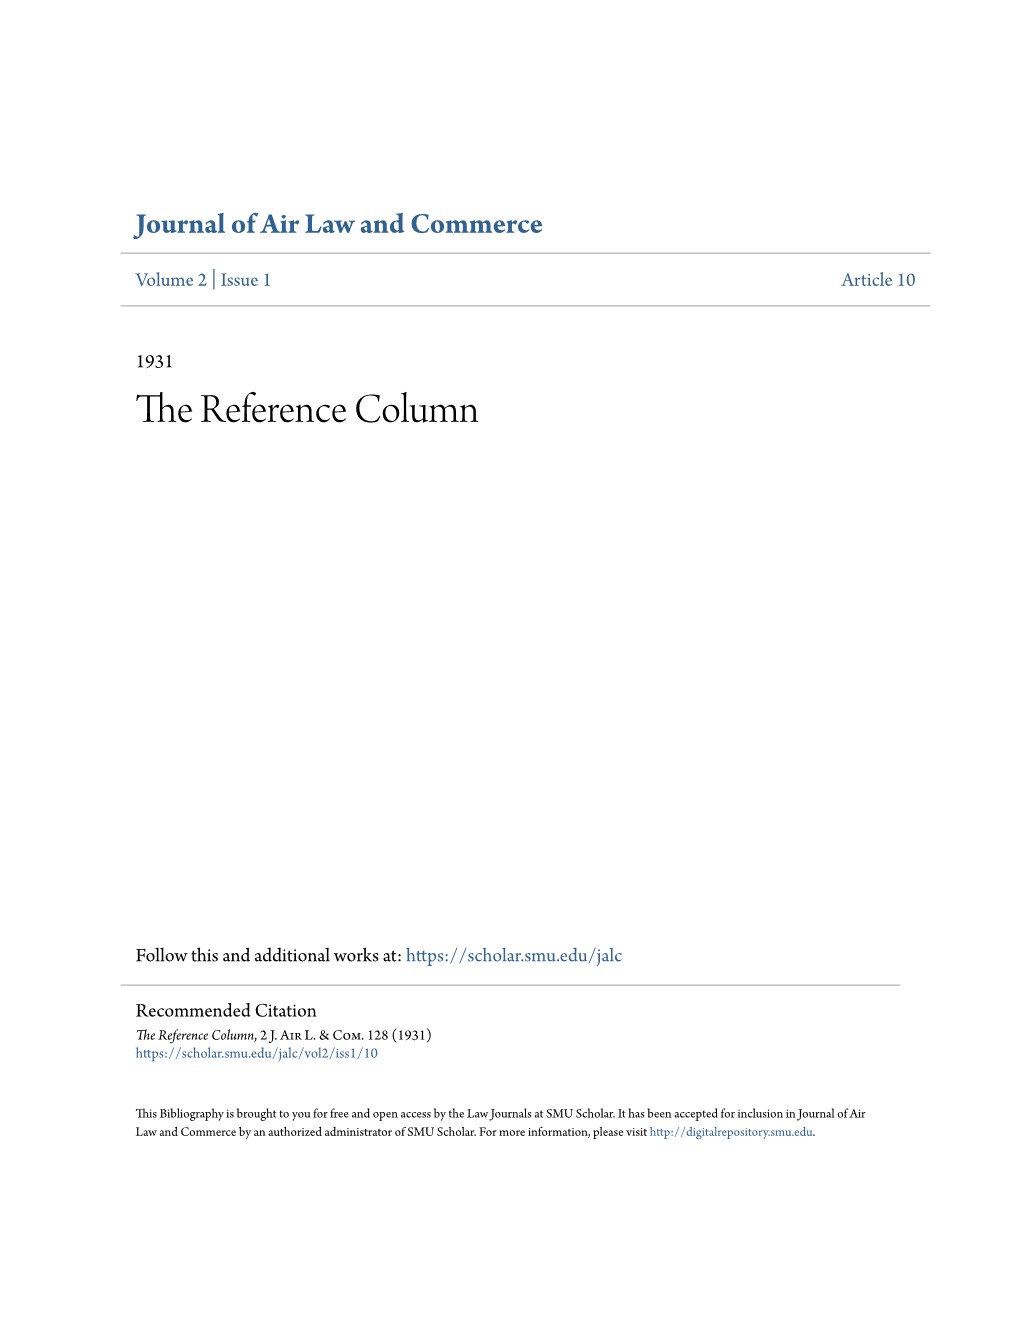 The Reference Column